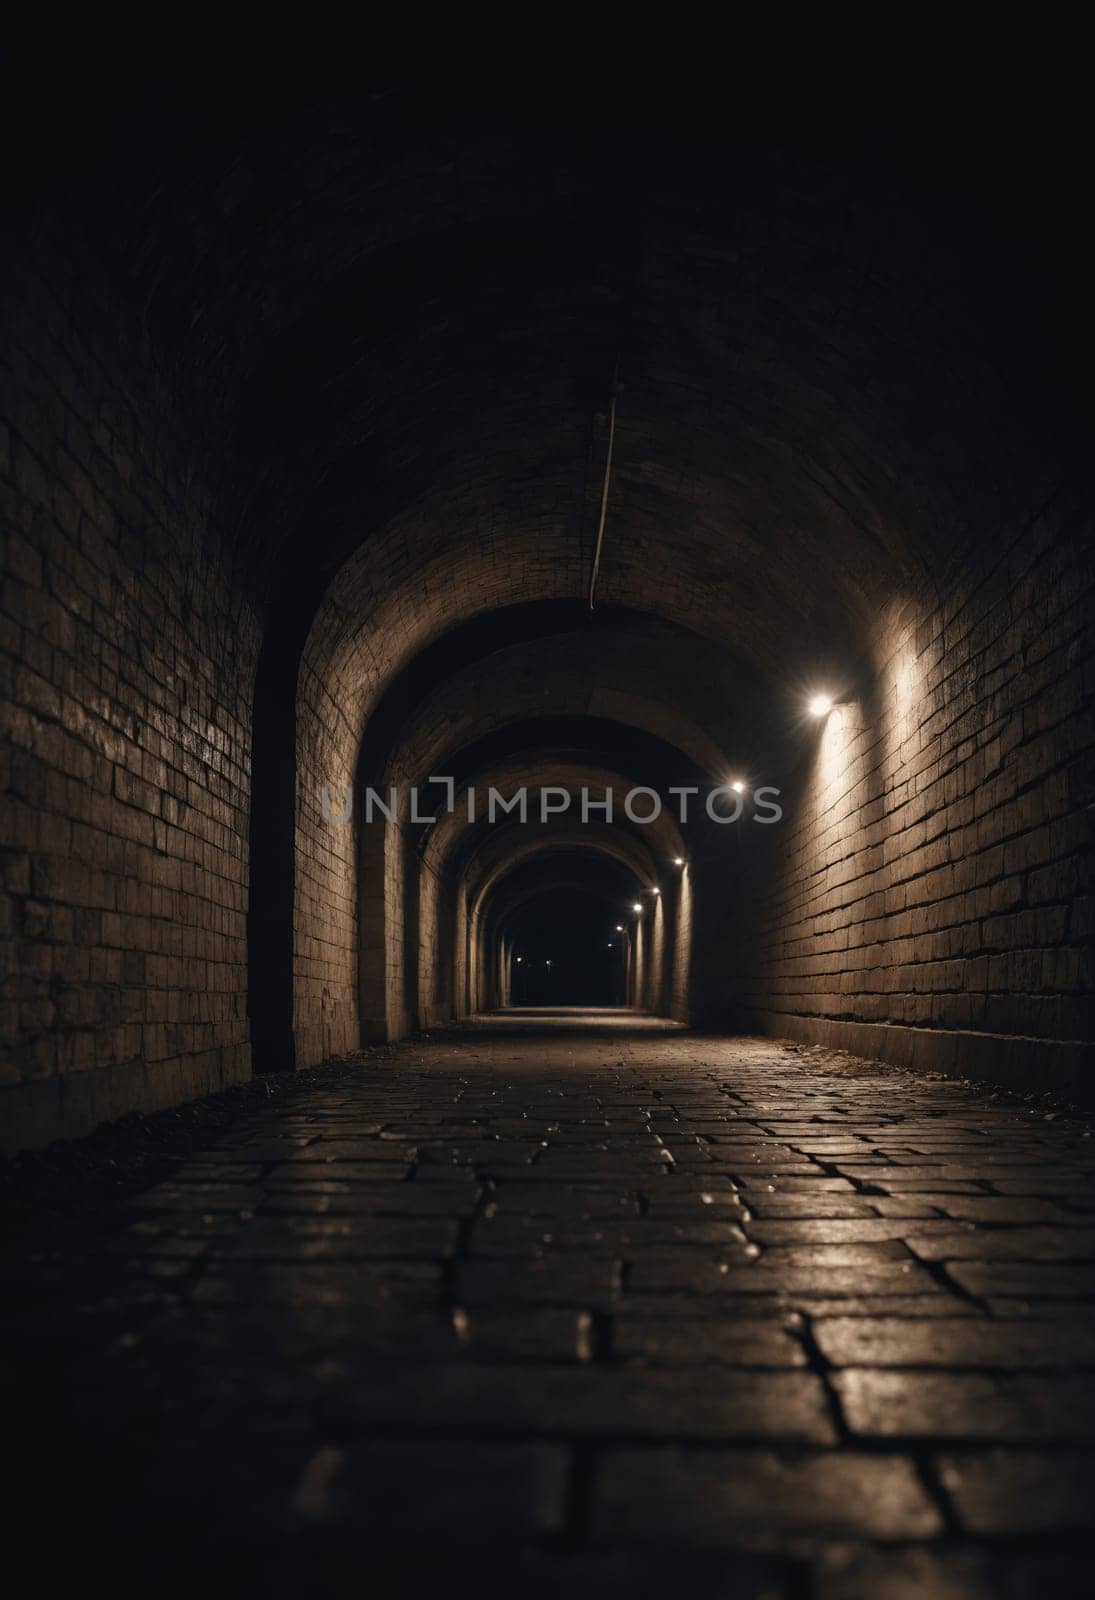 Experience a hypnotic journey through an illuminated tunnel. The side lights, overexposed, appear to guide the way on the slightly wet asphalt floor.